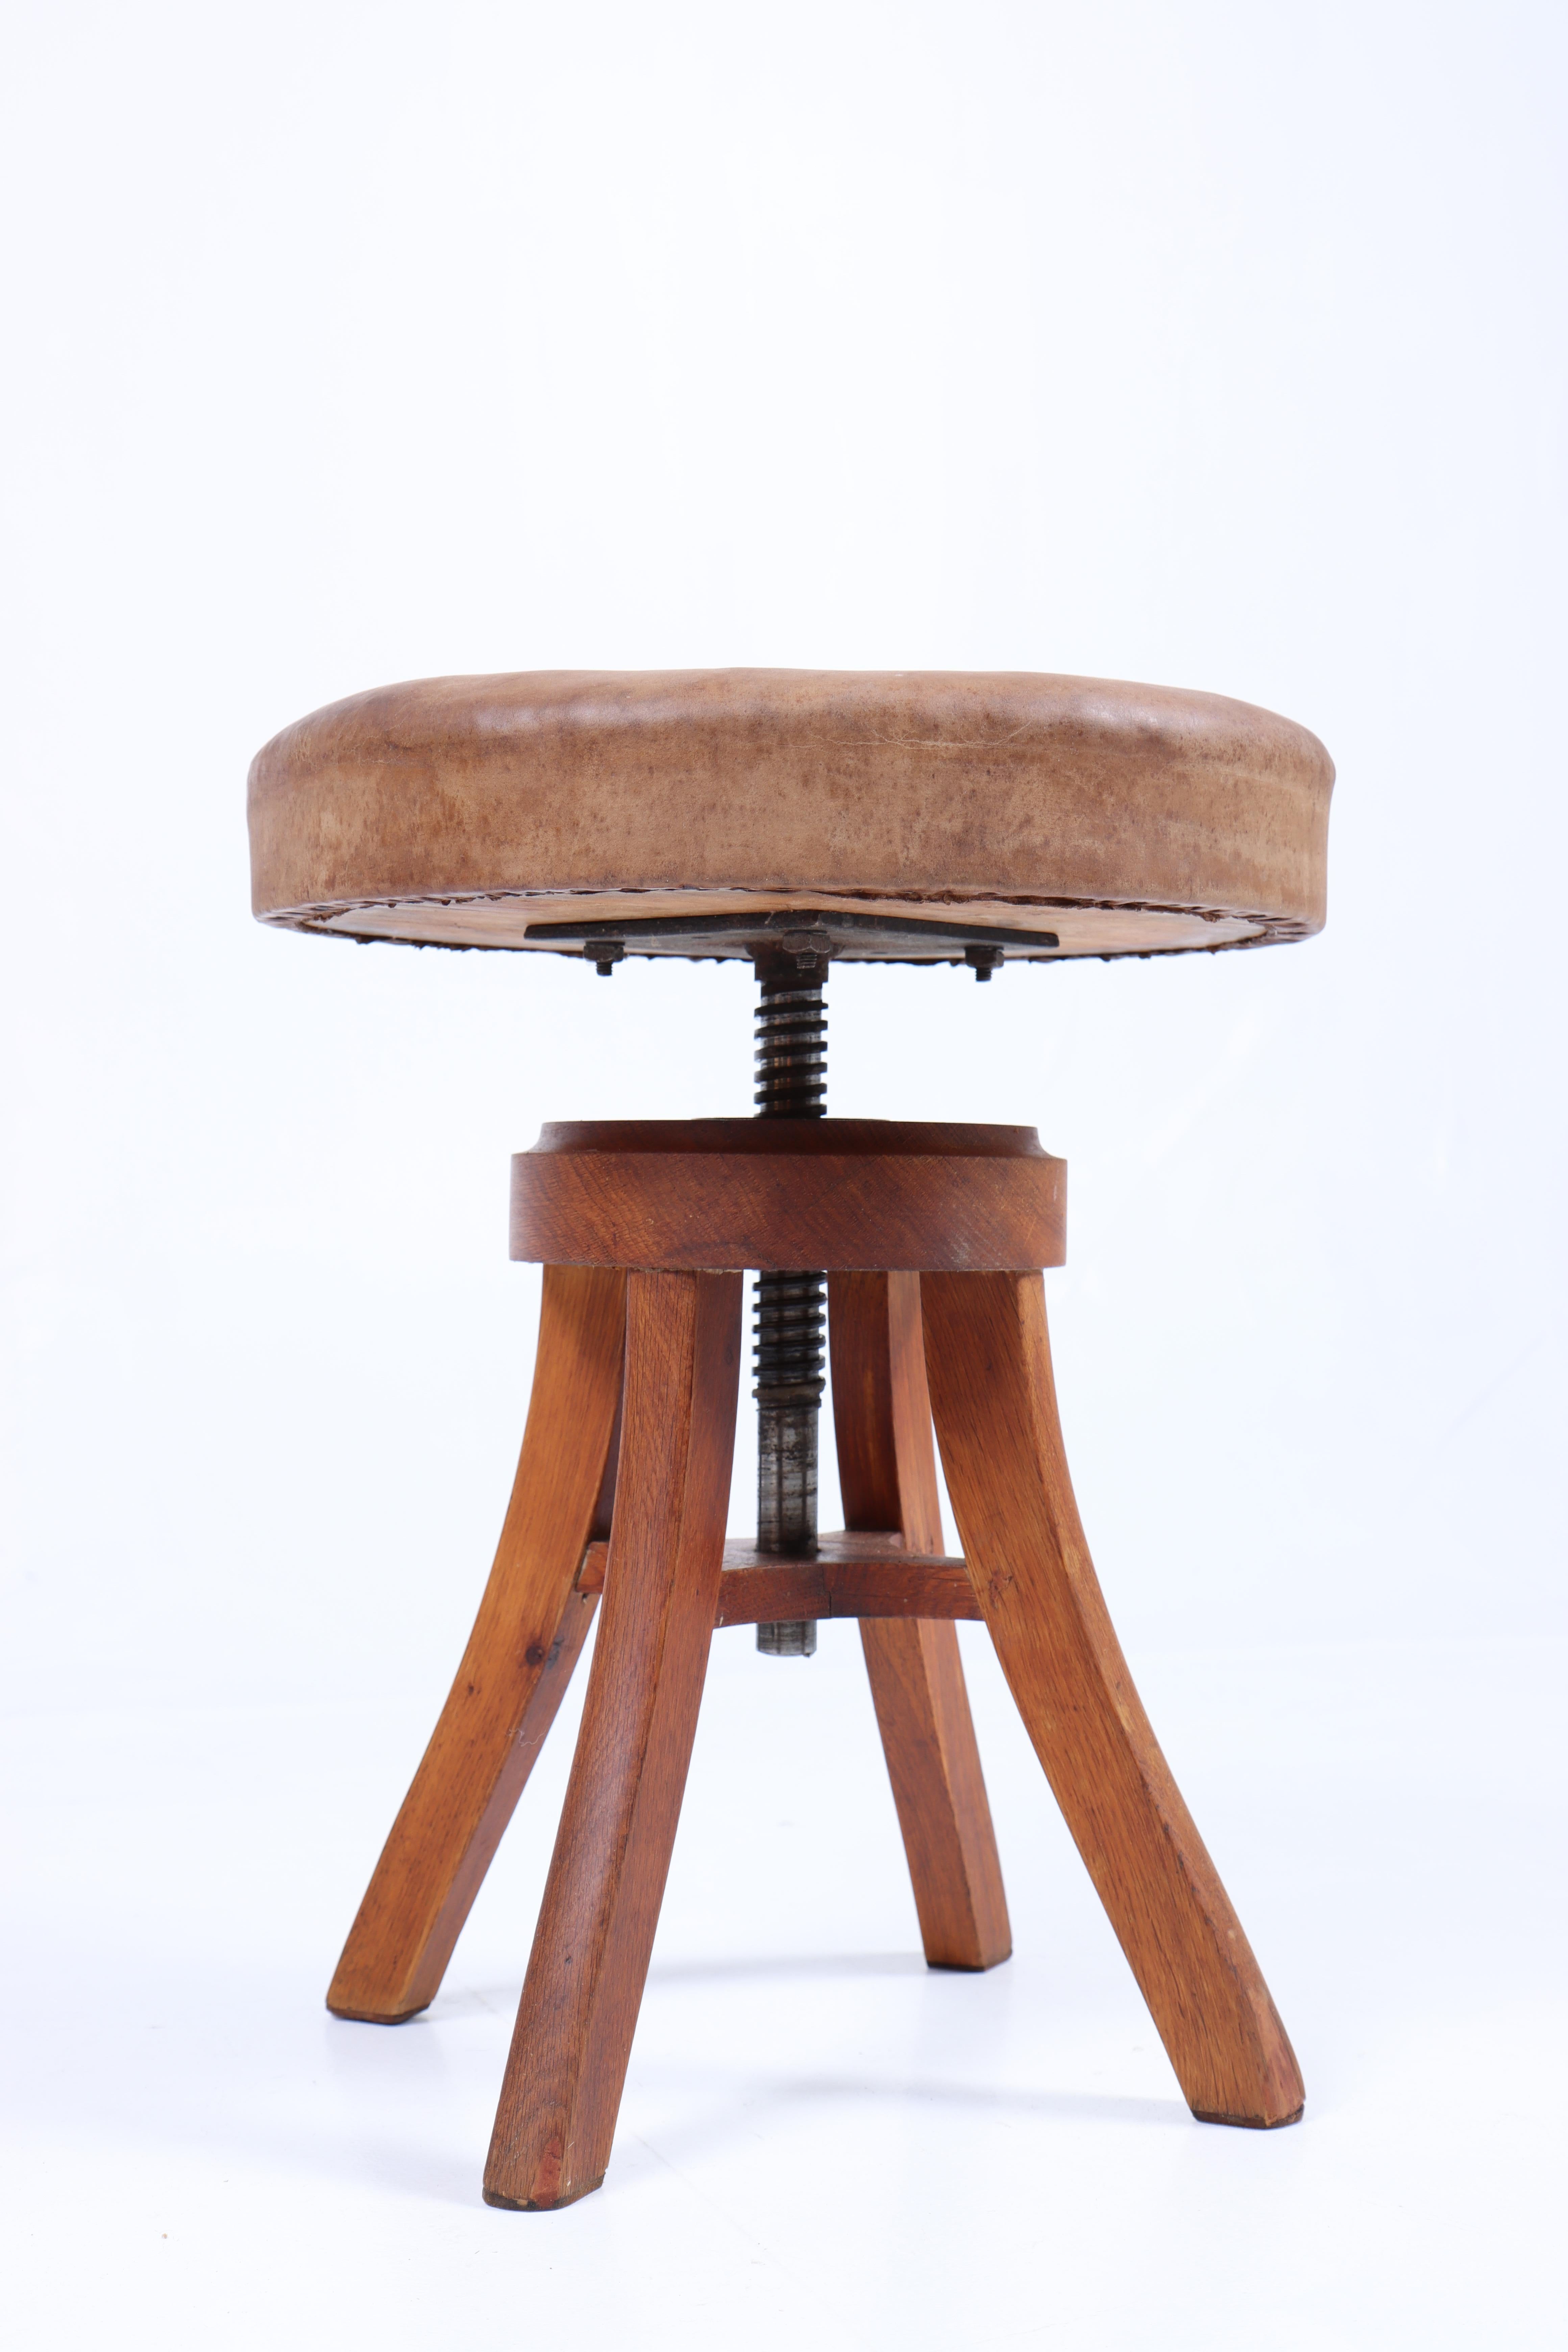 Artist stool in oak and patinated leather, designed and made in Denmark. Original condition.